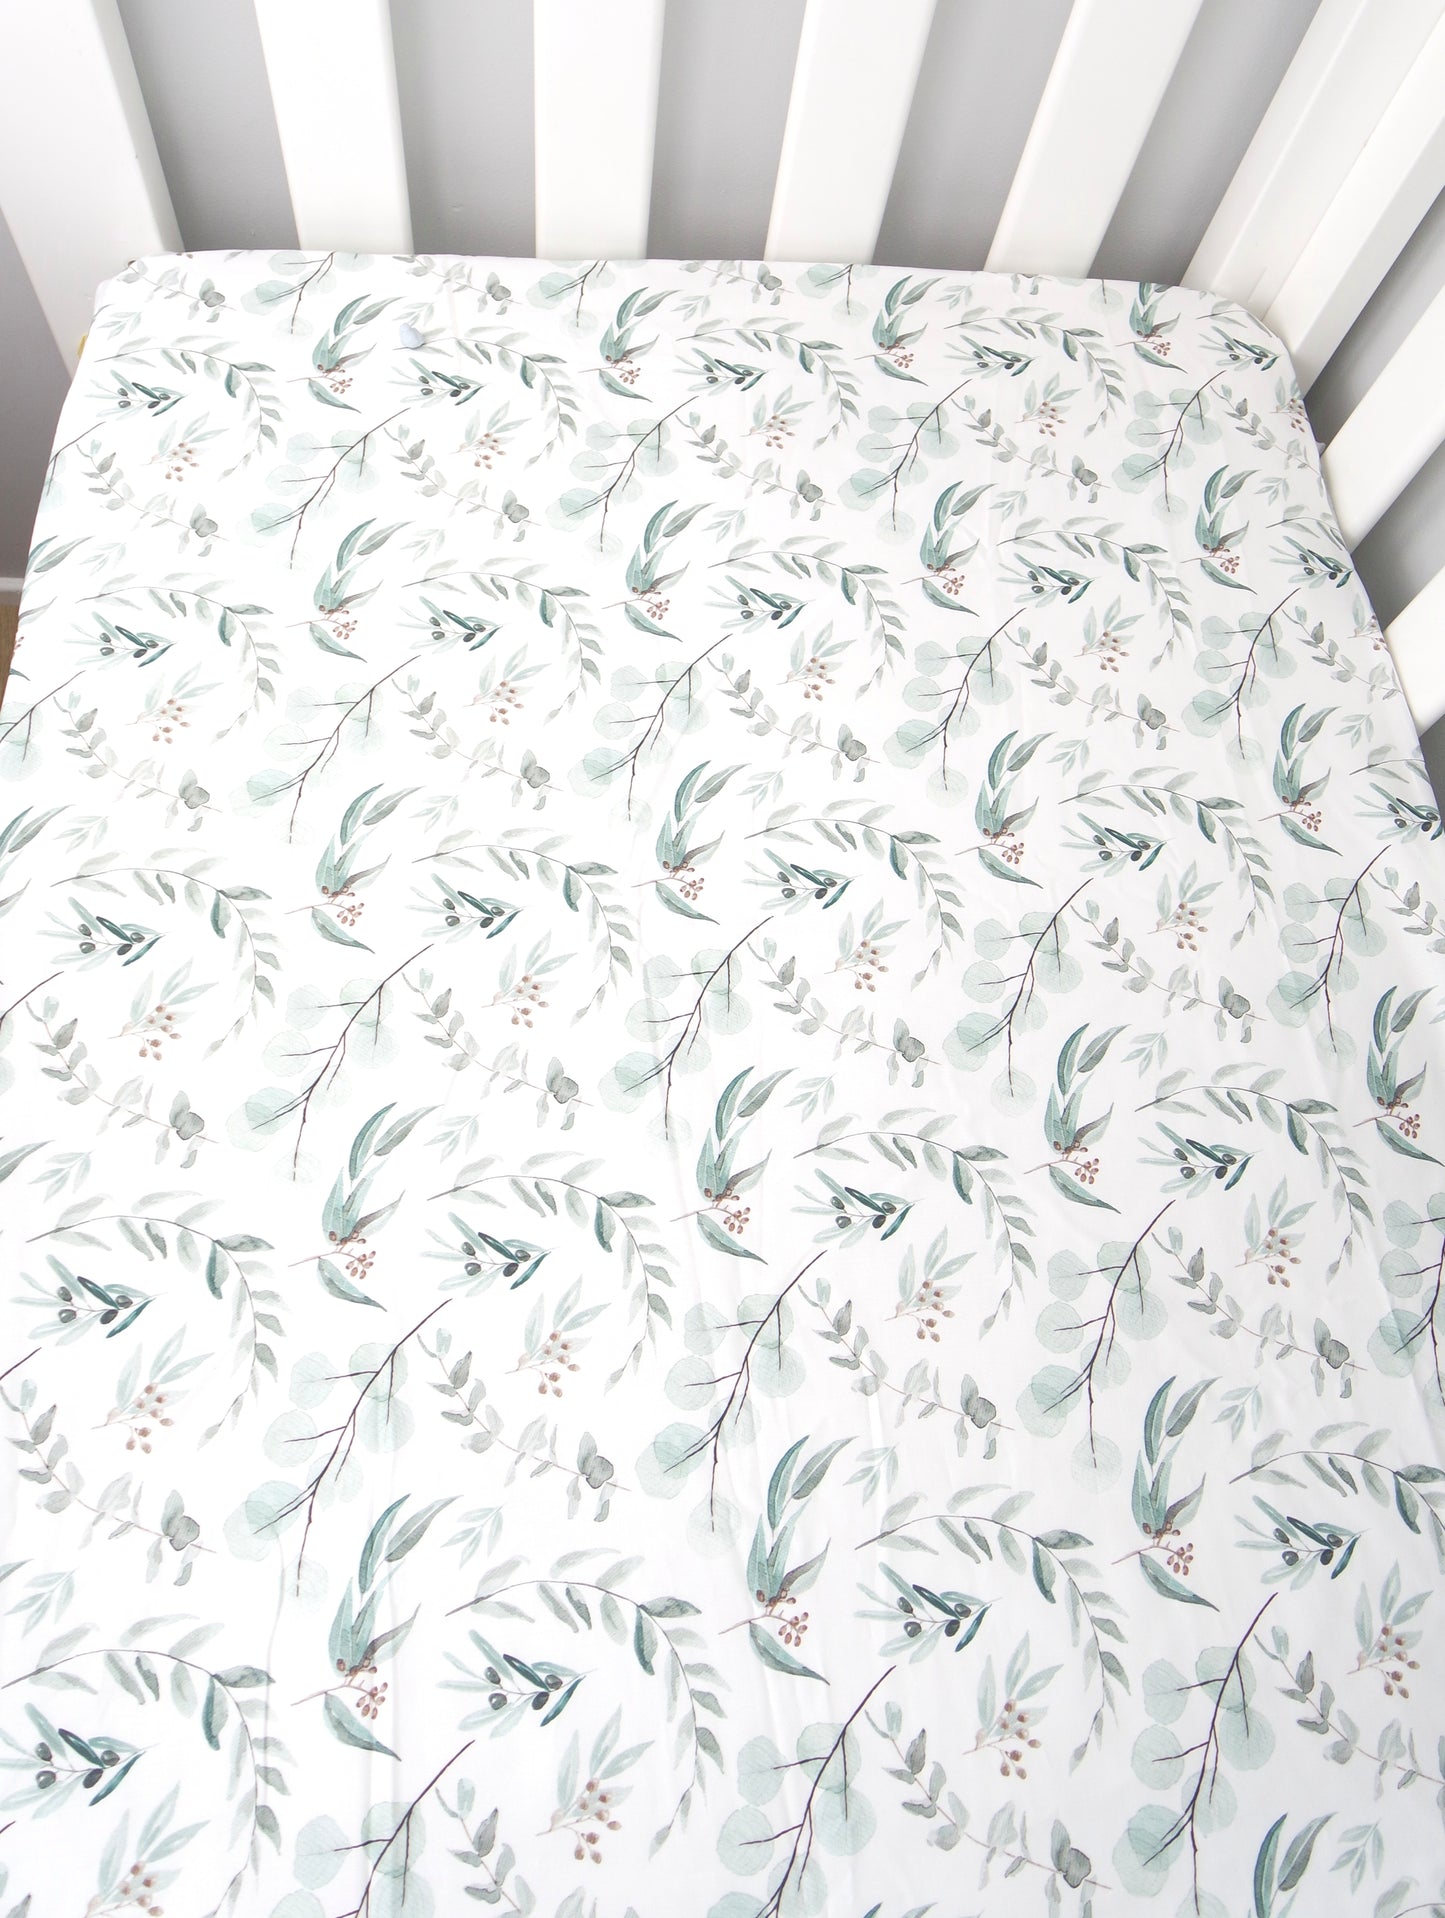 100% Cotton Cot/Bassinet Fitted Sheet or Change Table Cover - Eucalyptus